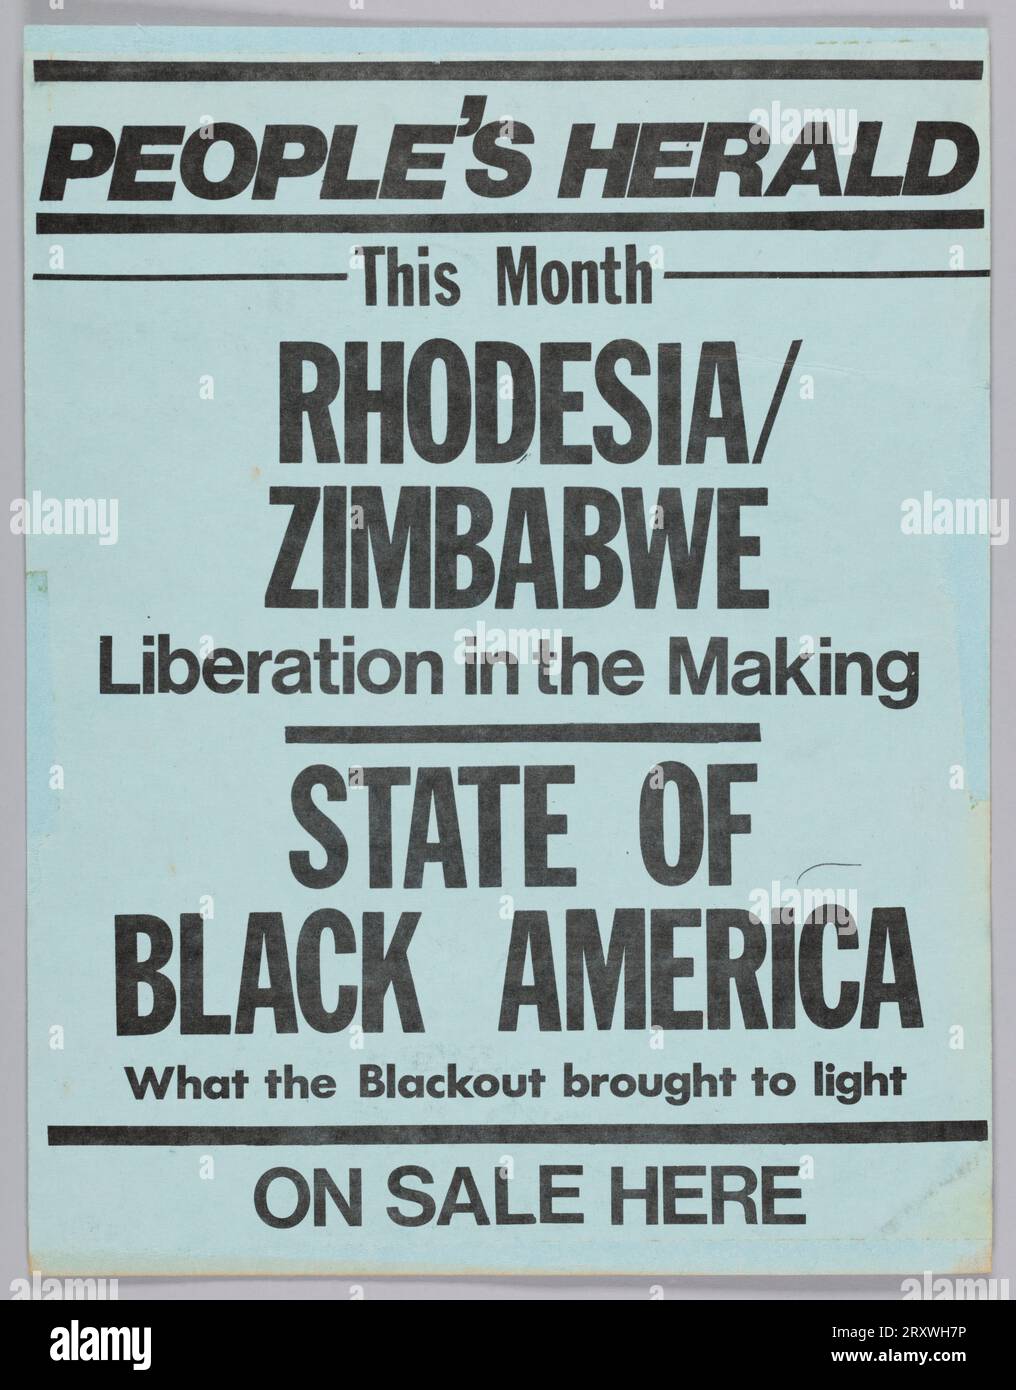 Flyer advertising the September 1977 issue of The People's Herald September 1977 Stock Photo